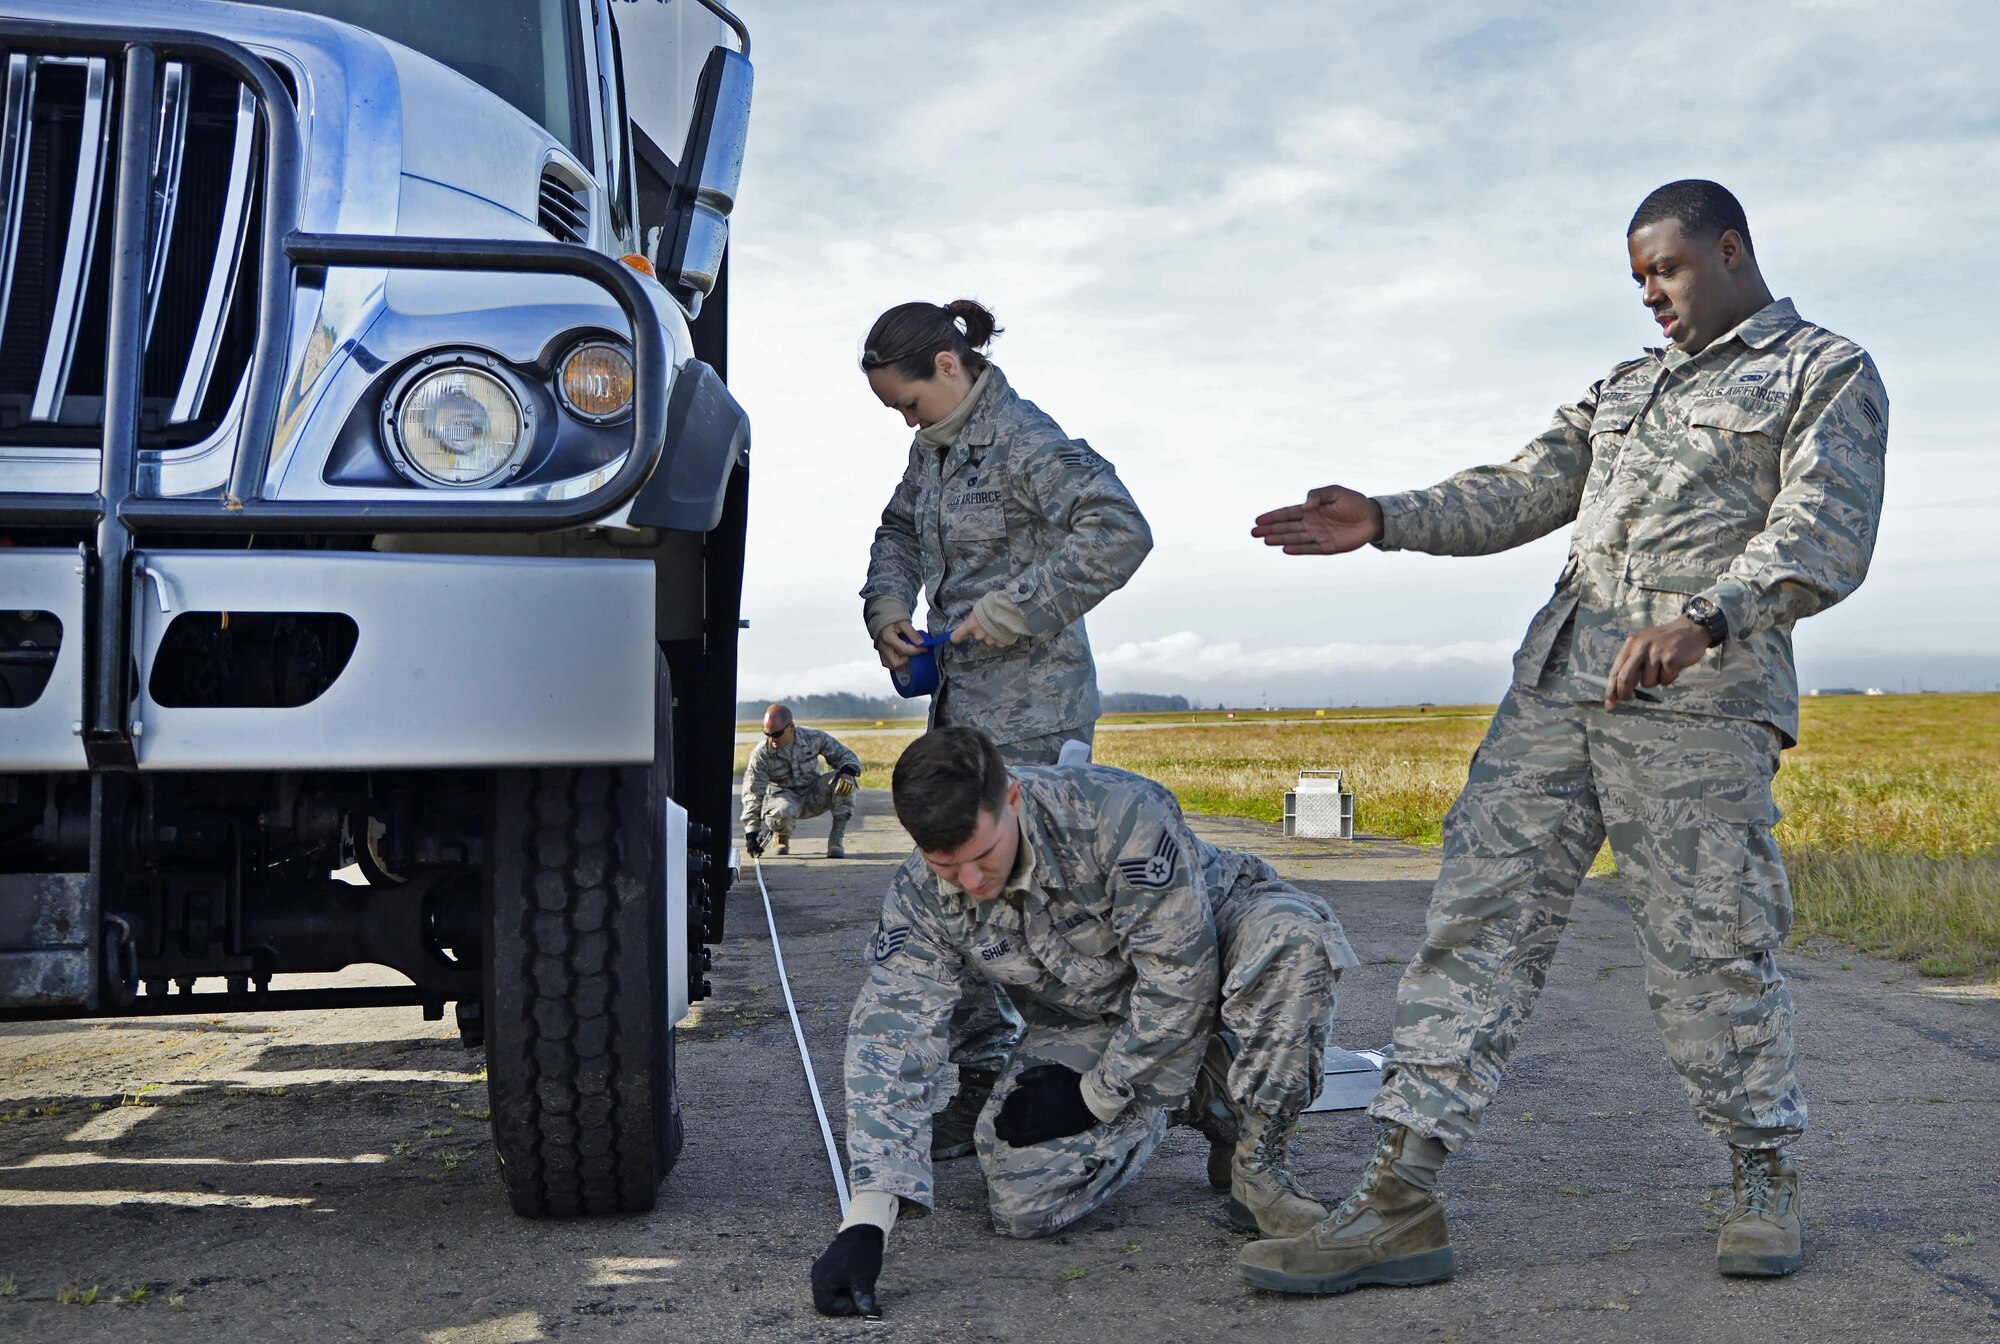 Staff Sgt. John Shue, Senior Airman Antonio Settle, and Senior Airman Audree Curry, 26th Aerial Port Squadron air transportation technicians, measure and weigh a vehicle before loading onto a C-5M Super Galaxy Aircraft during exercise Patriot Hook April 27, 2017 at Vandenberg Air Force Base.  Patriot Hook is an annual joint-service exercise coordinated by the Air Force Reserve, designed to integrate the military and first responders of federal, state and local agencies by providing training to mobilize quickly and deploying in military aircraft in the event of a regional emergency or natural disaster.  (U.S. Air Force photo by Benjamin Faske